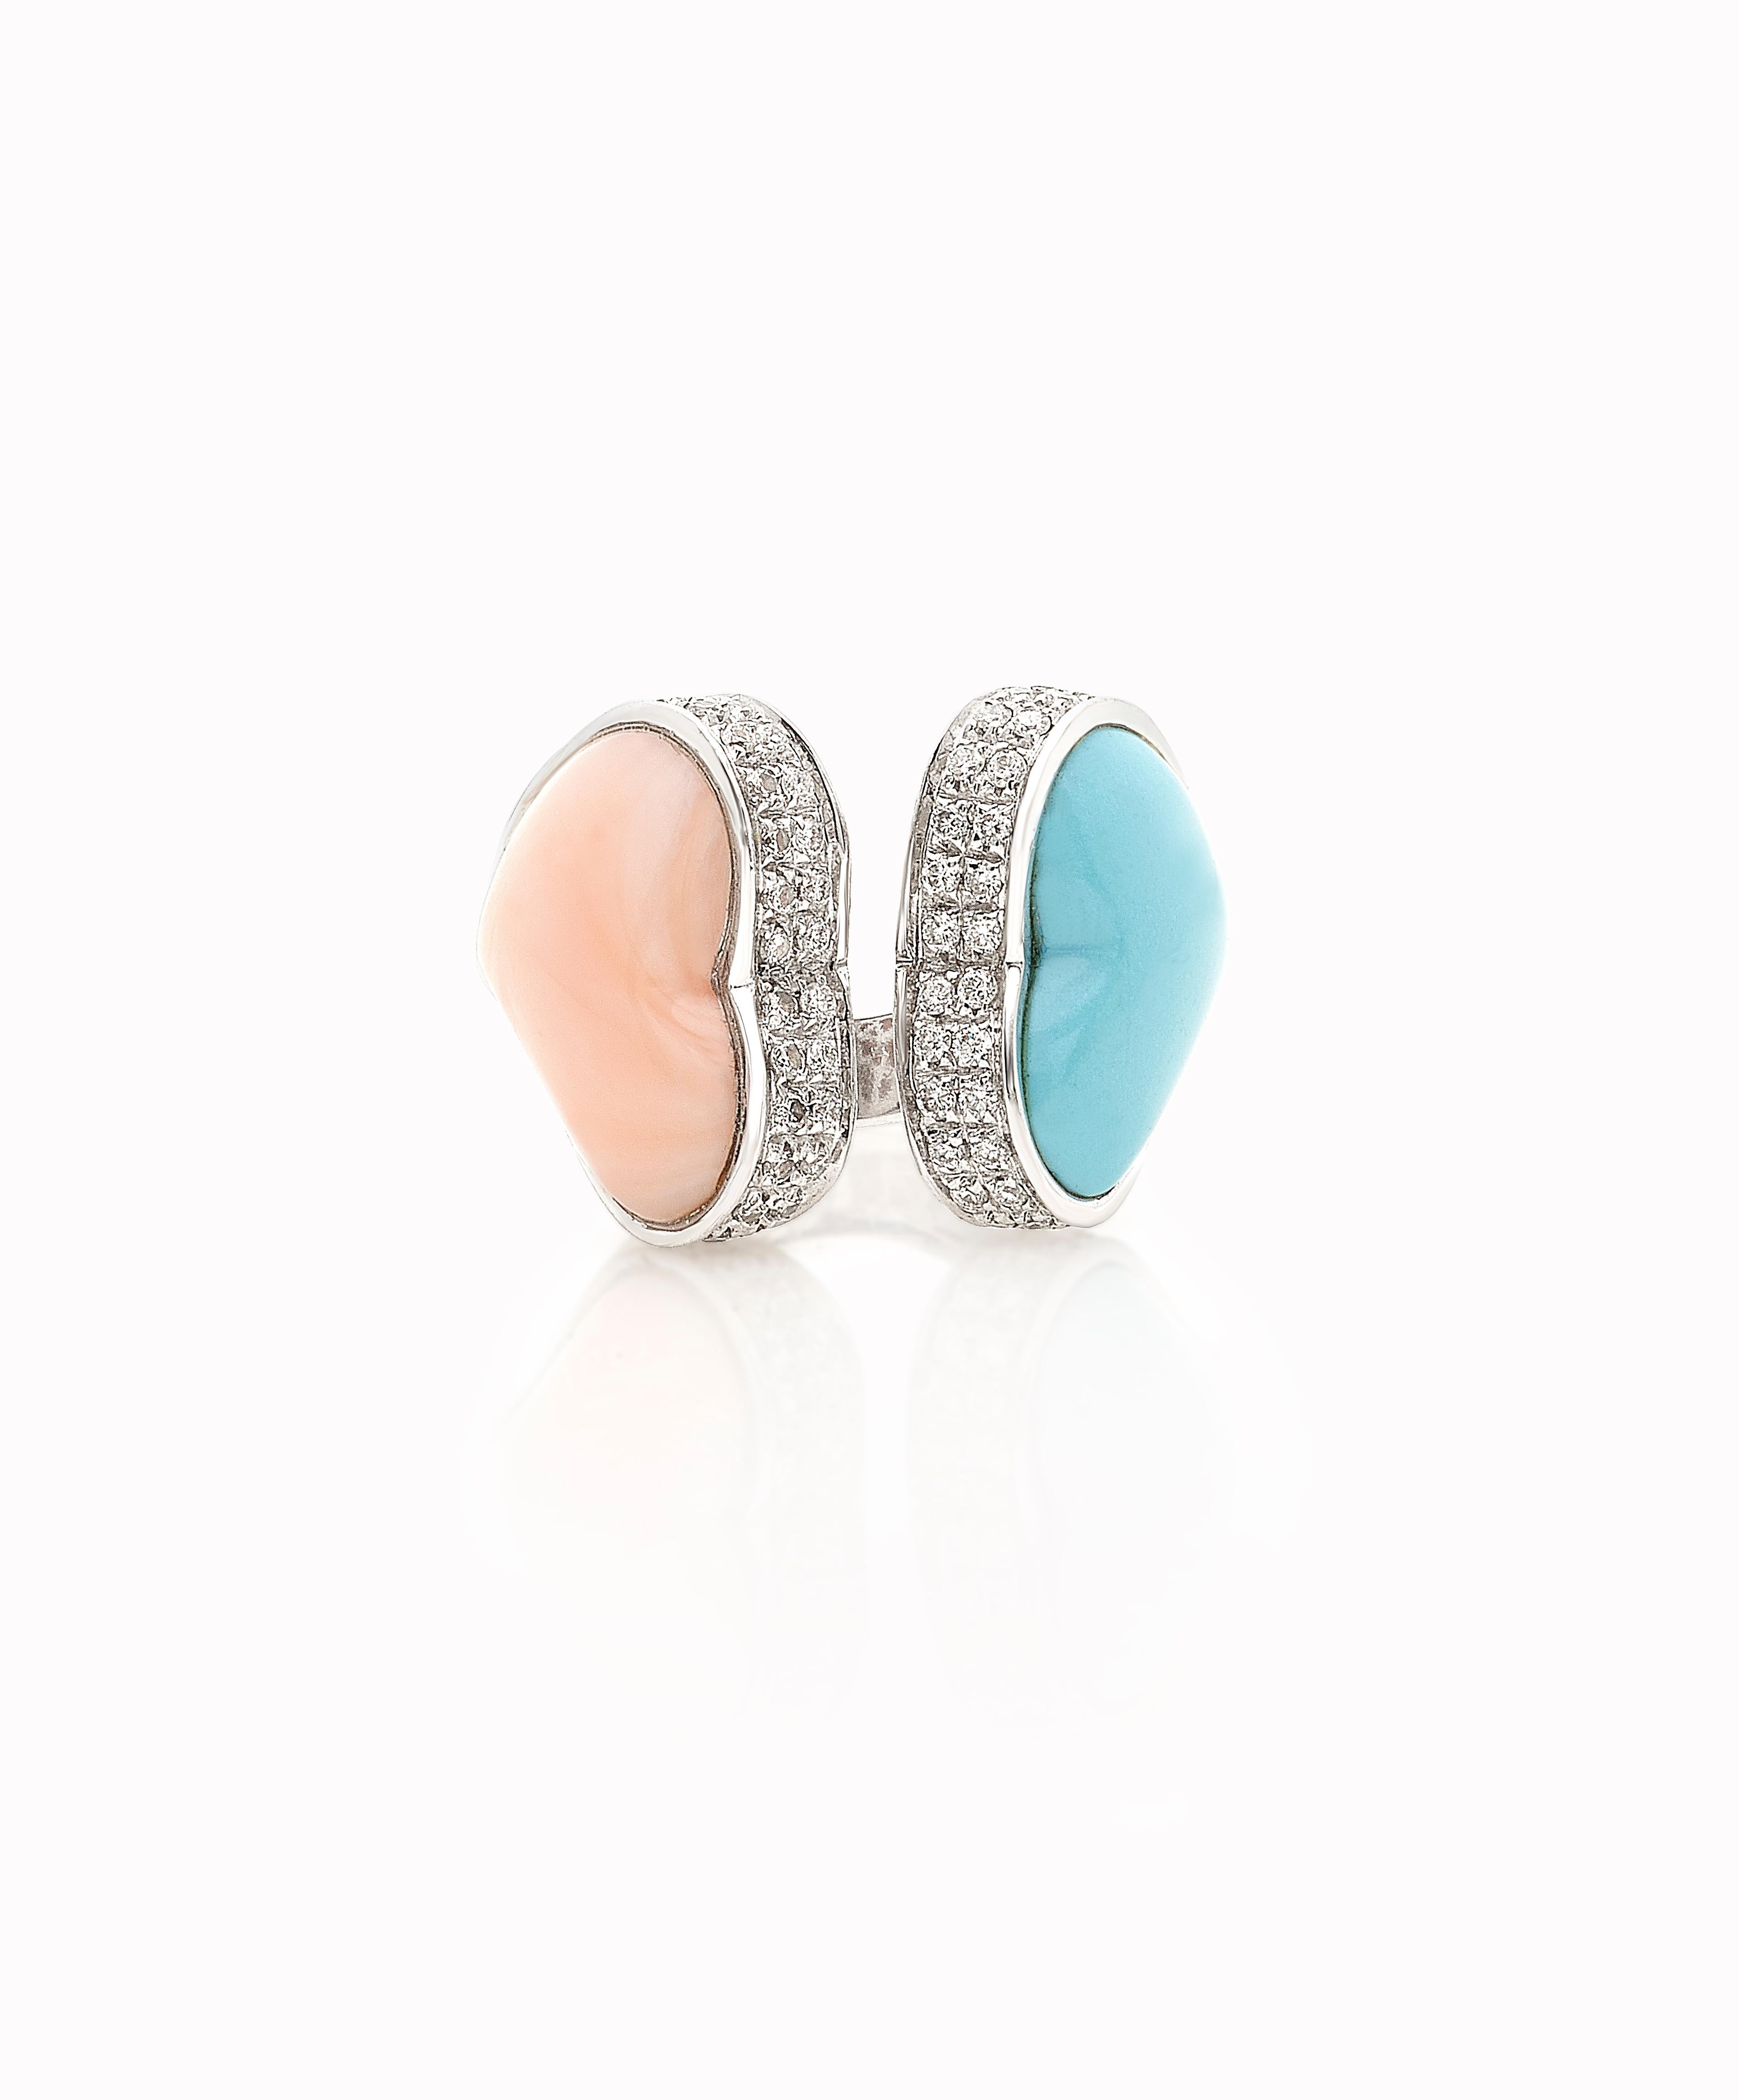 Double Heart Ring in coral, turquoise and diamonds in 18kt white gold.
The ring is made of two hearts that are set in the white gold and surrounded by 1.6 white diamonds.  
Each side has a heart: each one is the mirror of the other one.  
When the